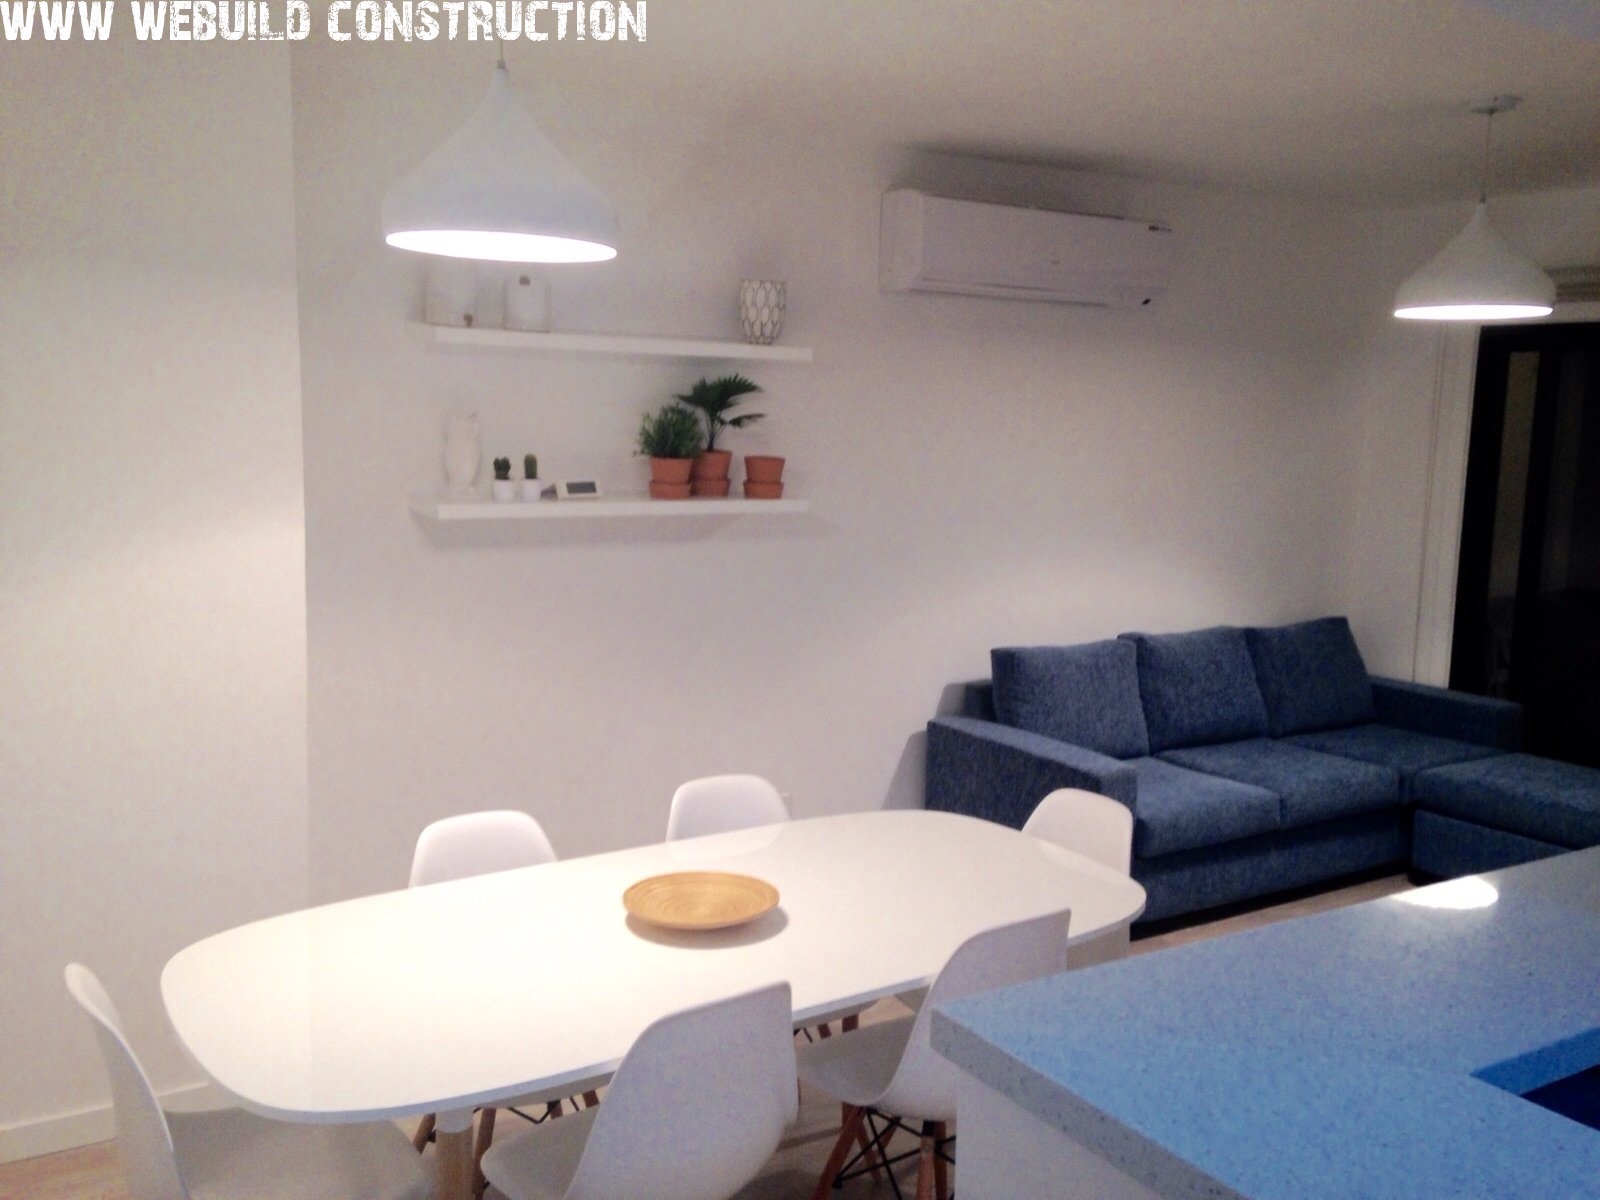 An apartment in Larnaca, Cyprus that underwent renovation, remodelling, reconstruction.